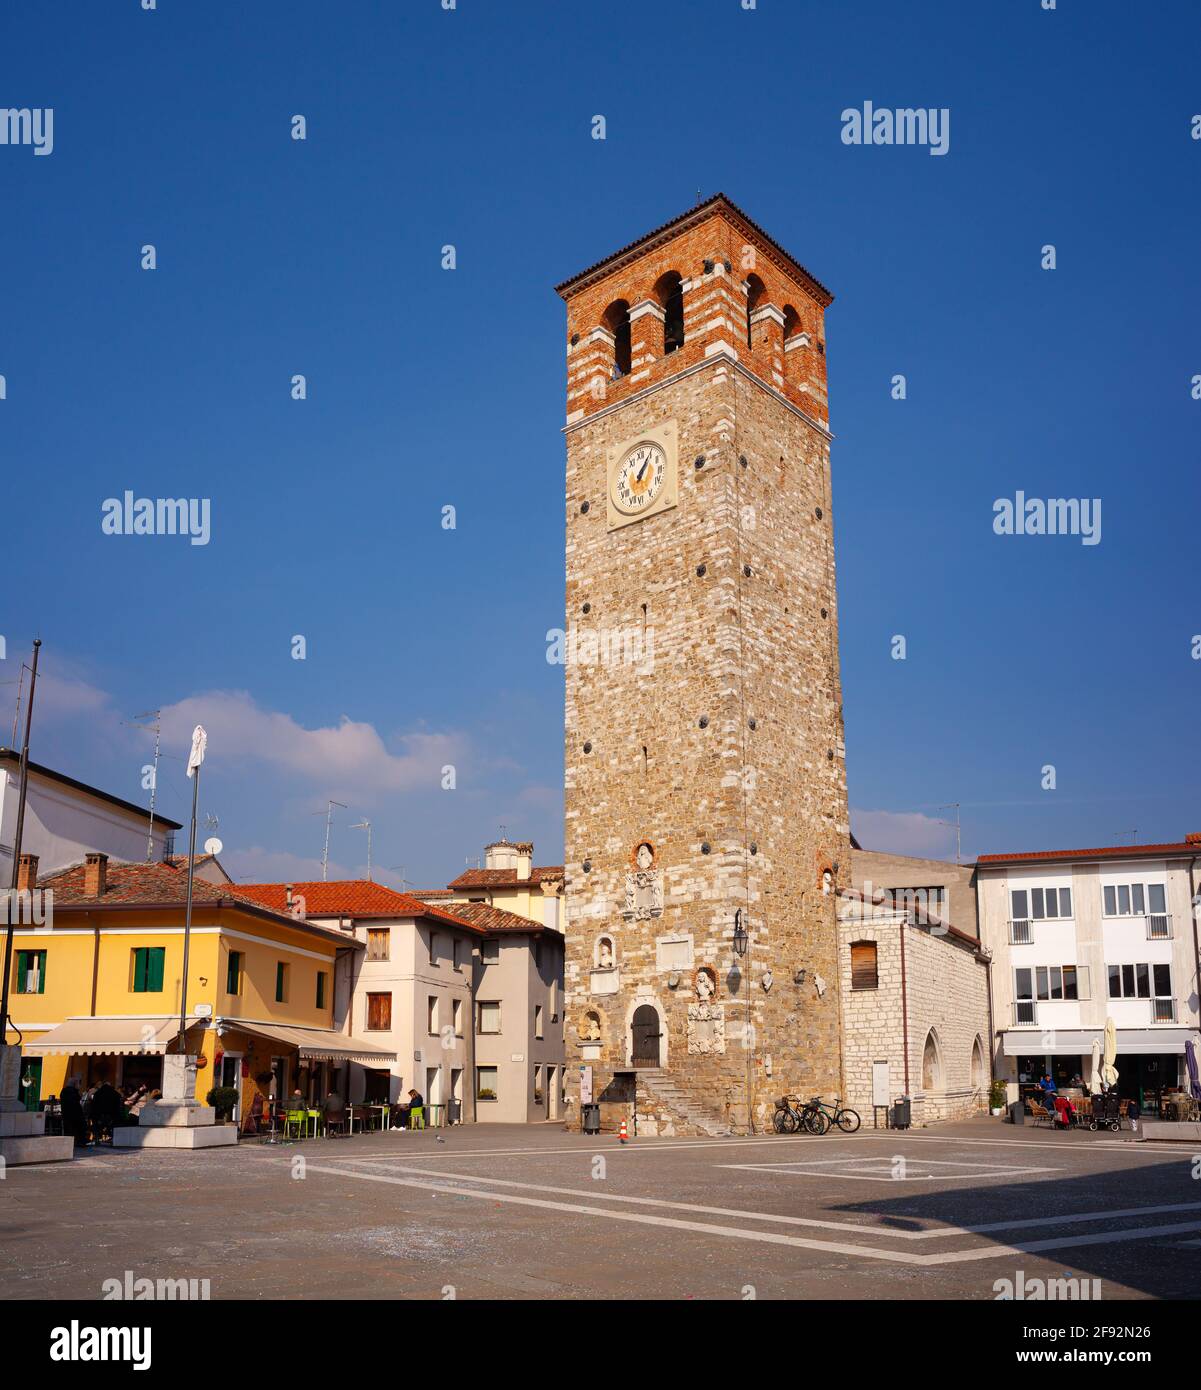 Marano, Italy - February, 16: View of the historic Millenaria (thousand-year old) tower in Marano square on February 16, 2021 Stock Photo